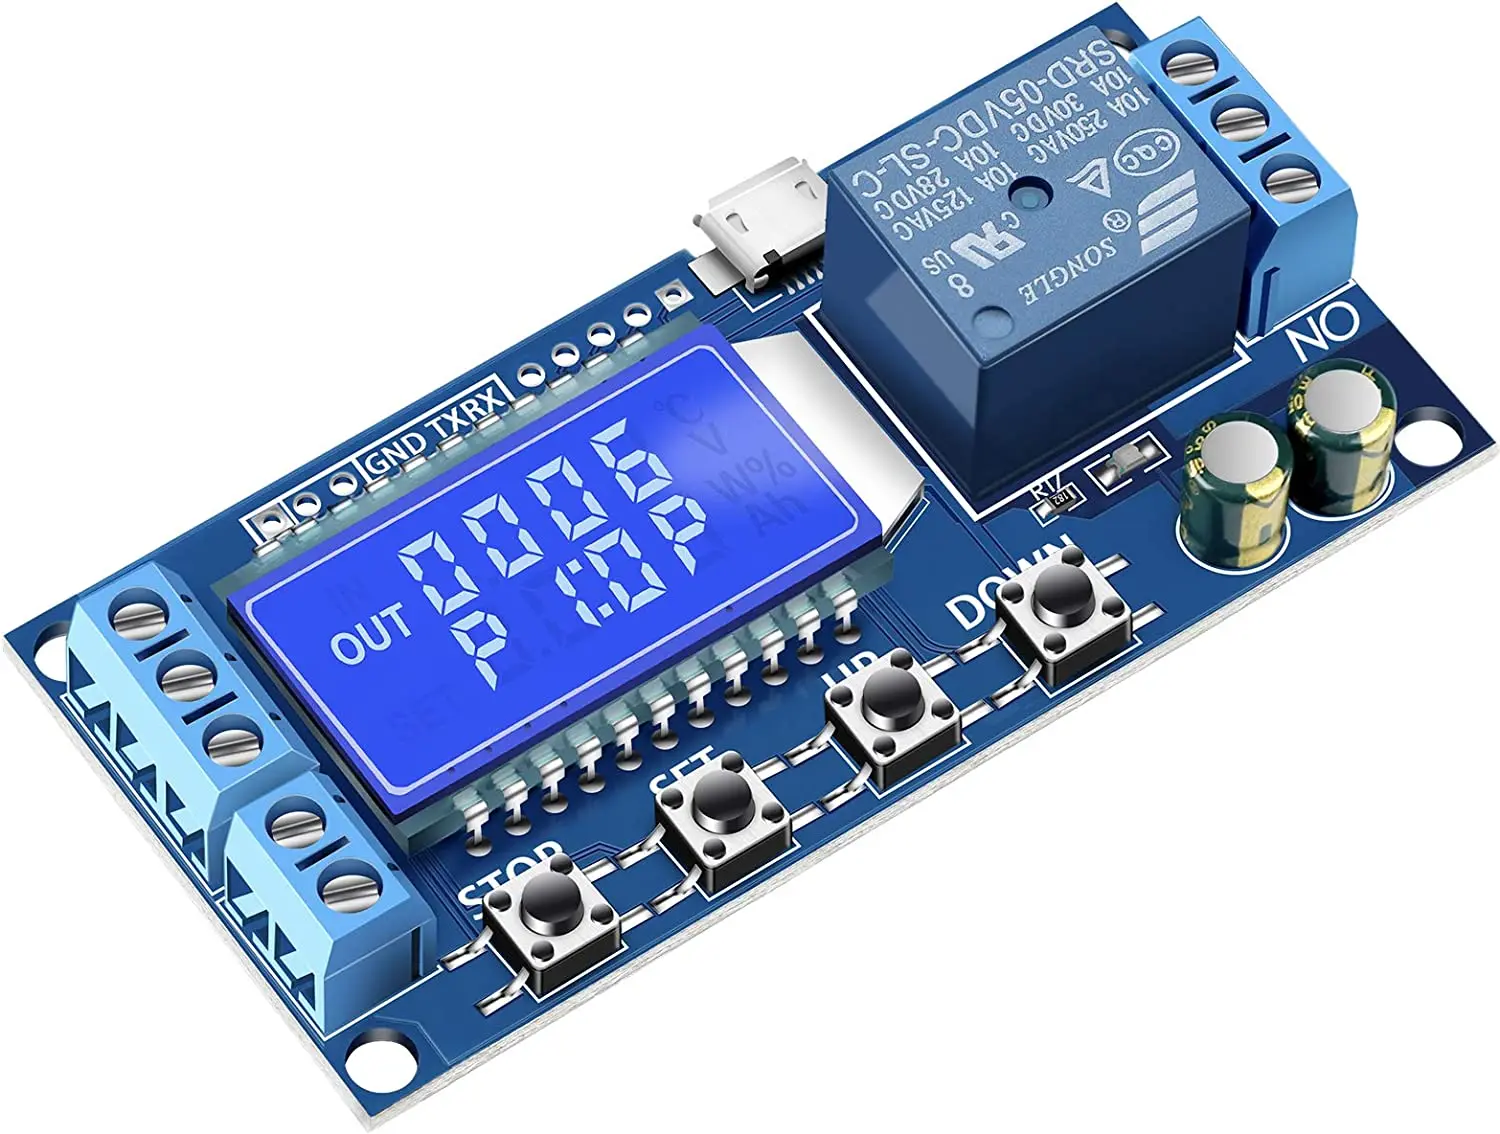 

DC 5V 12V 24V Delay Off Cycle Timer 0.01s-9999mins Adjustable Trigger Delay Switch Control Relay Board With LCD Display Support